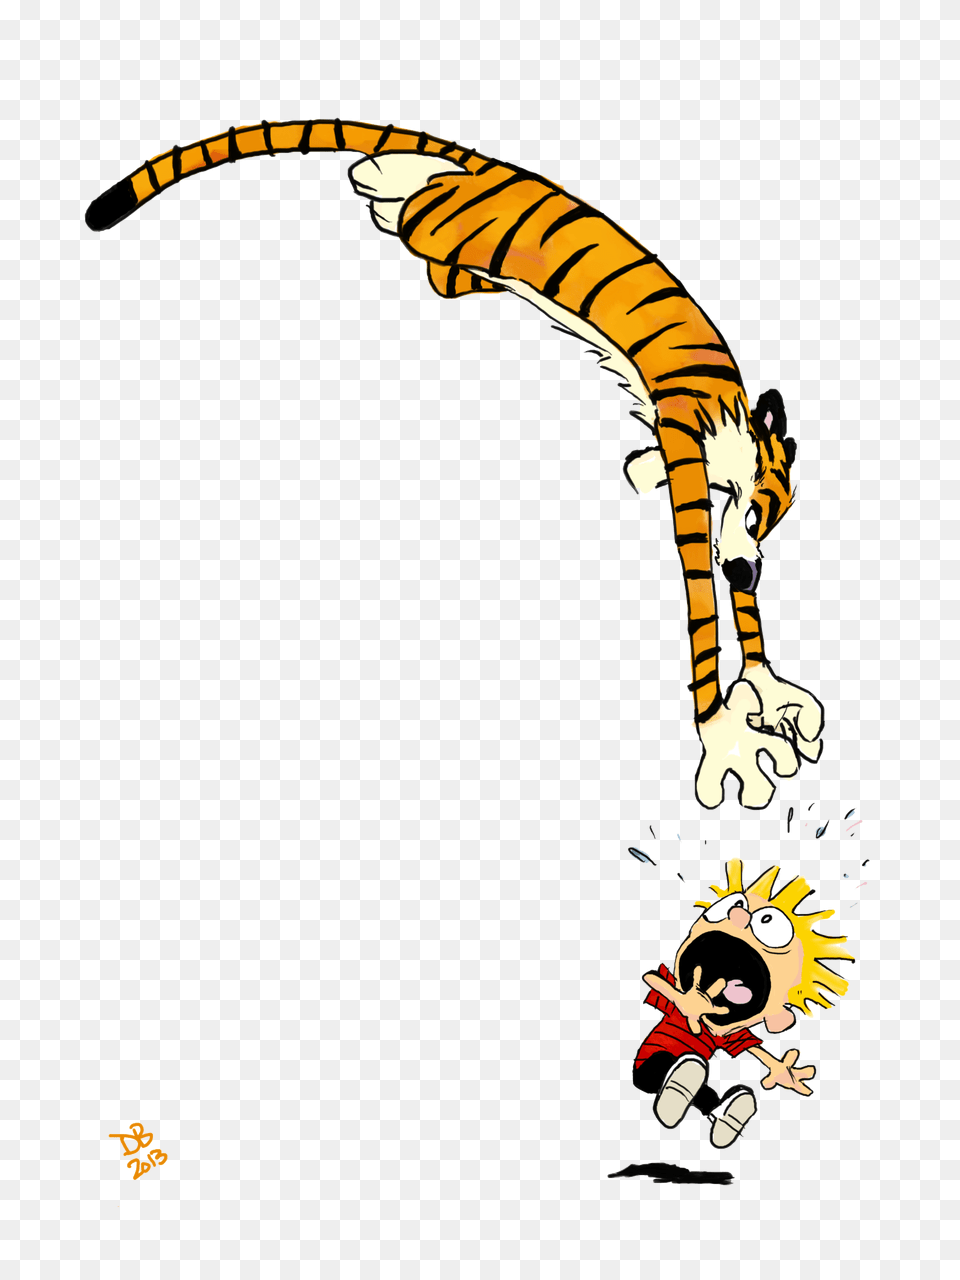 Calvin And Hobbes Images Smoke Pipe, Cartoon Free Png Download